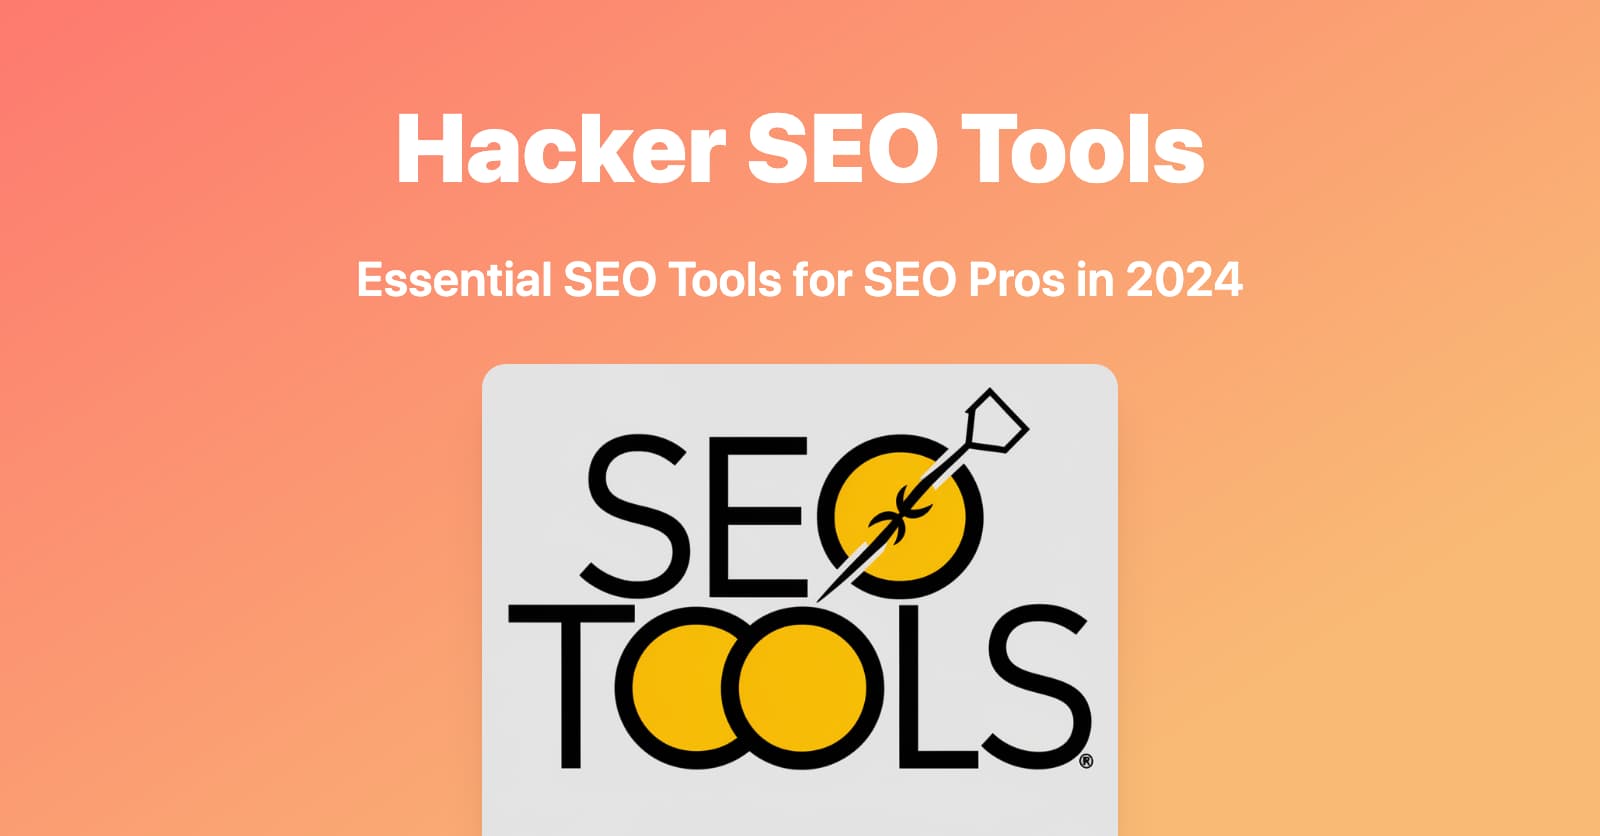 Essential SEO Tools for SEO Pros in 2024